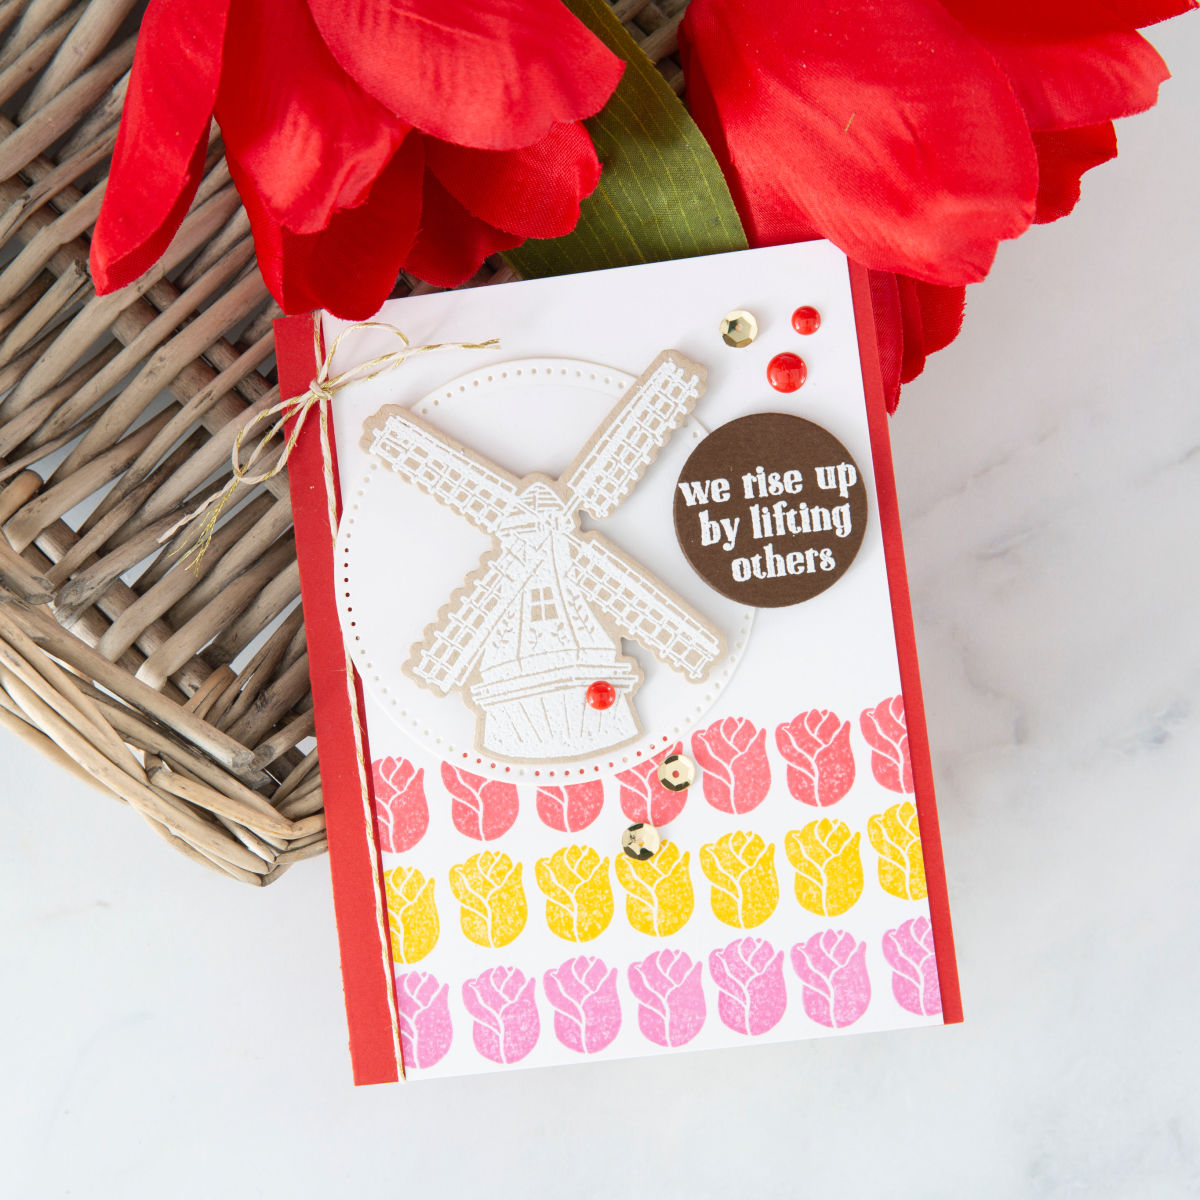 We Rise By Lifting Others crisp and bright handmade card with pink, red, and yellow stamped tulips and beautiful Dutch windmill embossed in white. #funstampersjourney #cardmaking